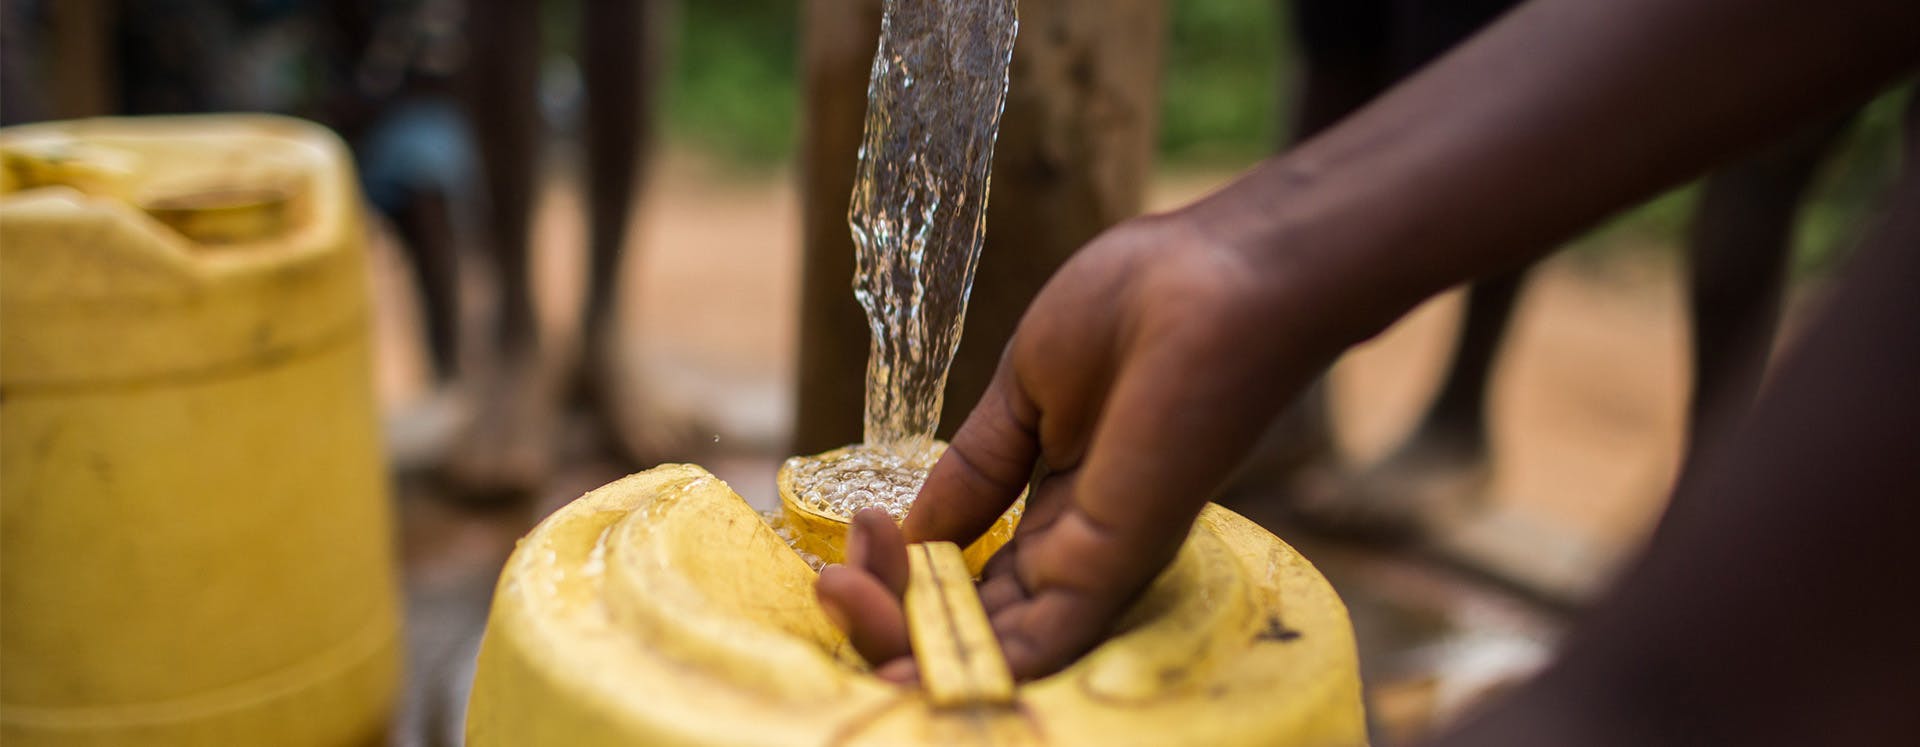 Filling jerry can with water from charity: water well.